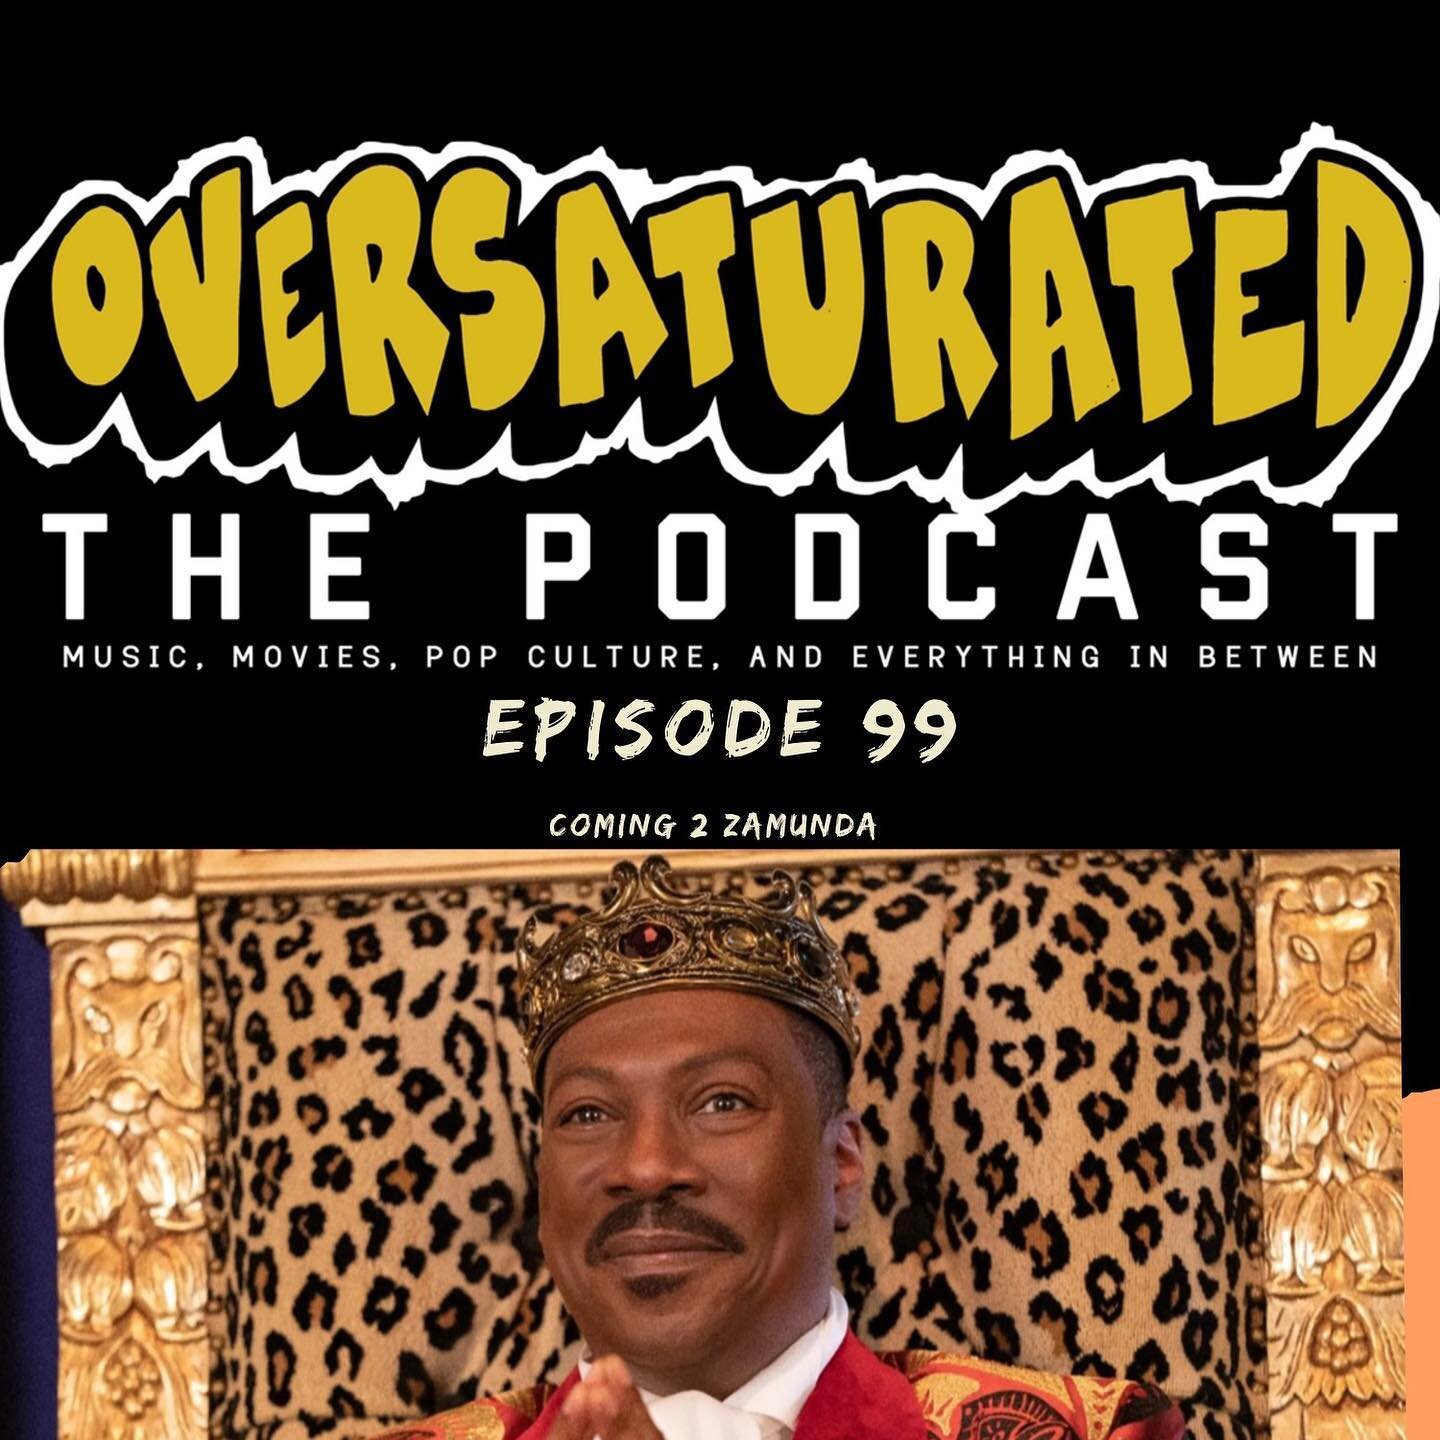 On Episode 99 of @oversatthepodcast , the guys discussed the Coming 2 America Sequel! The highs / lows and everything in between.

First look out for #offthedome 

Topics 
-Grammys 2021 (Pre-Show Awards)
-The Weeknd Boycotts Grammy&rsquo;s
-Swizz and